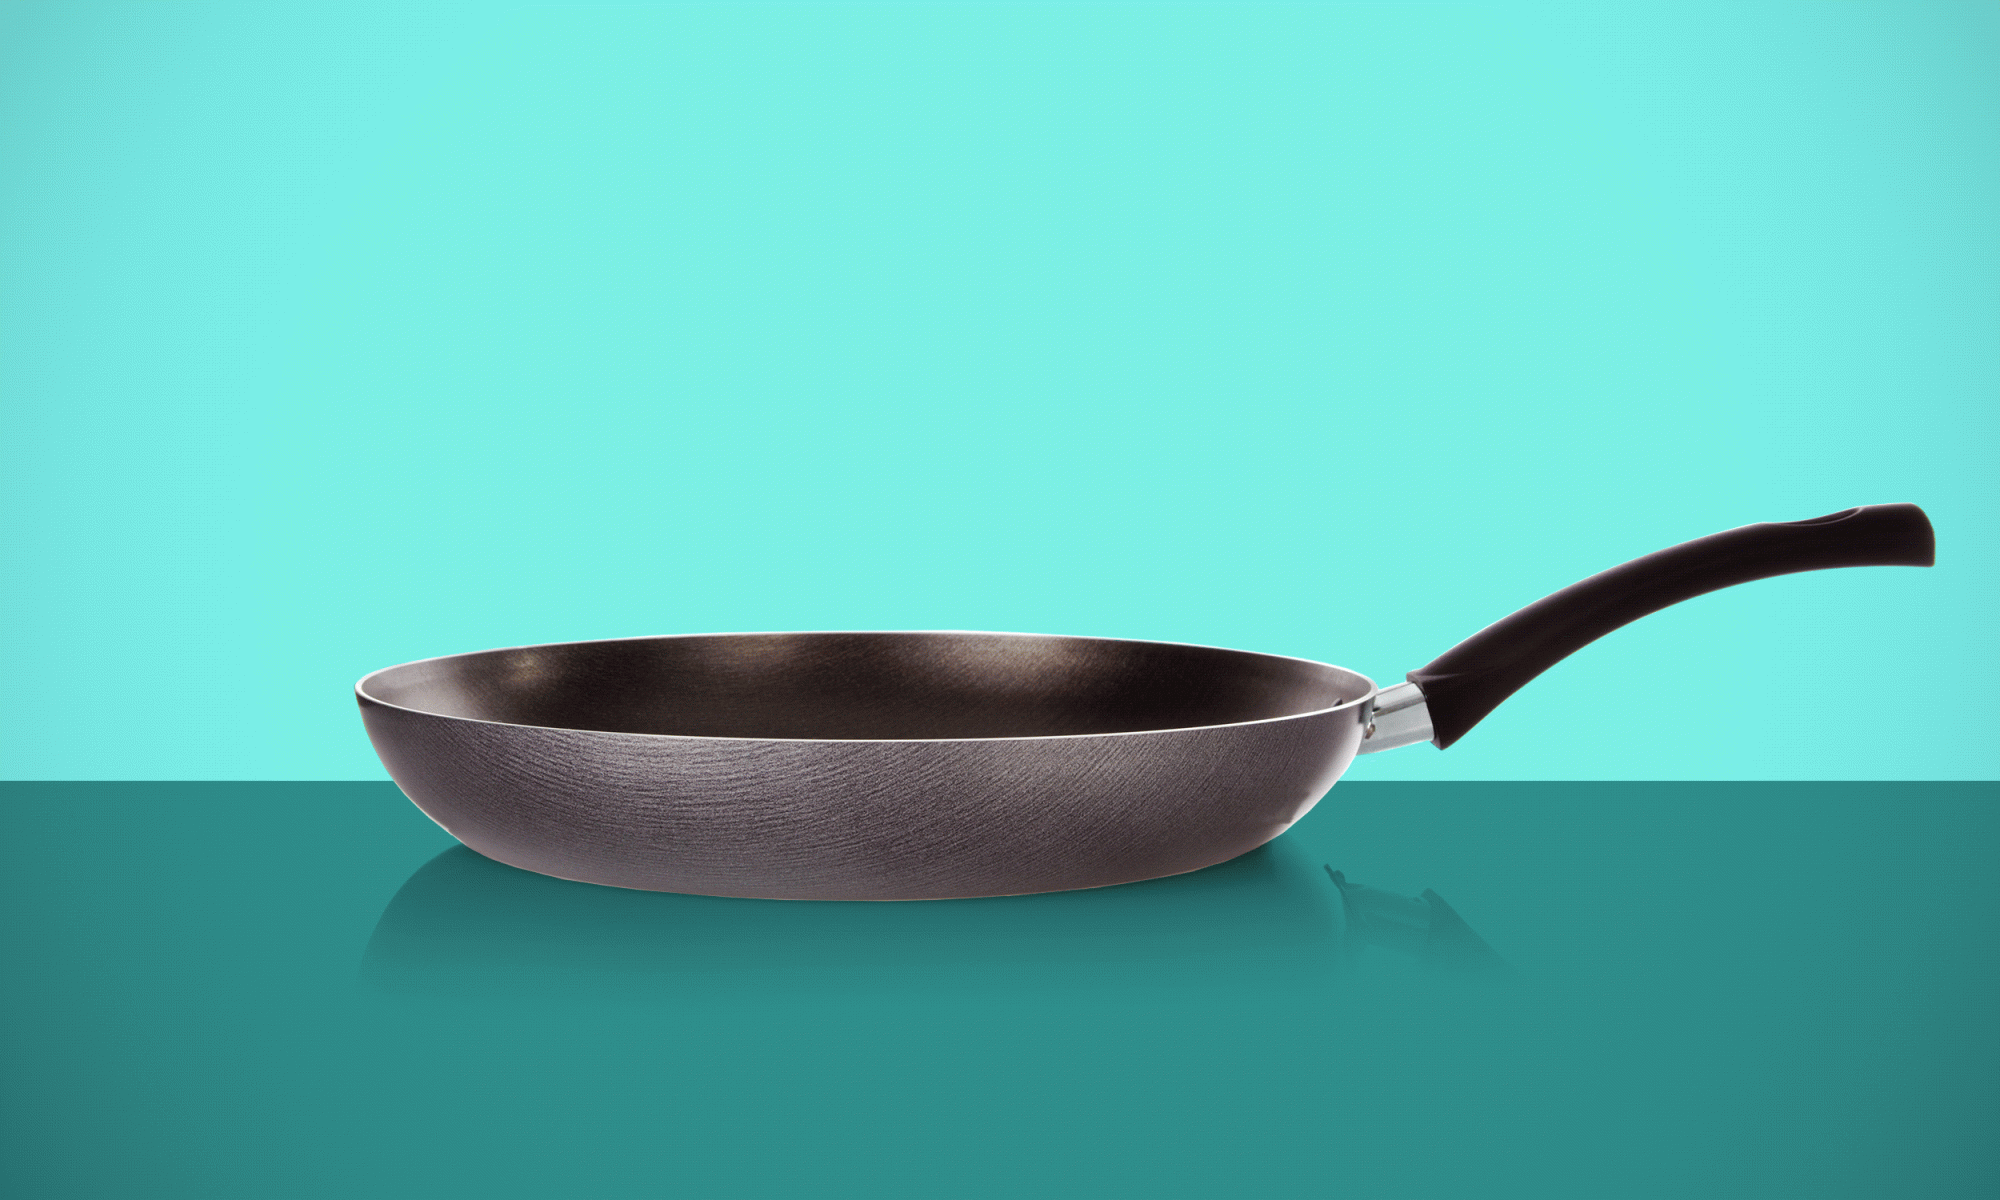 How to keep your non-stick pans performing like new